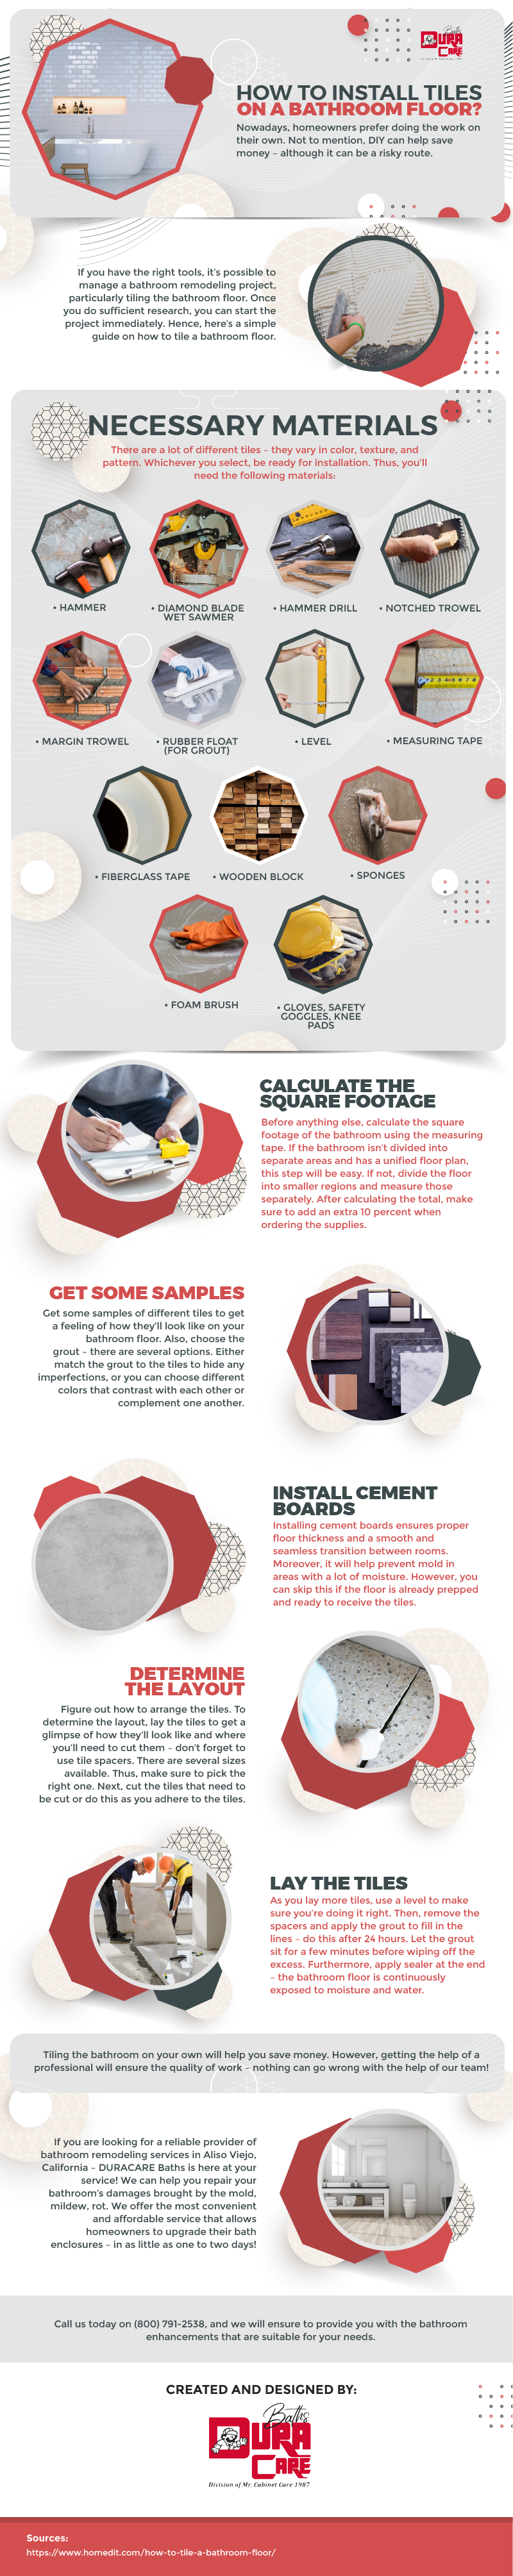 How to Install Tiles on a Bathroom Floor infographic